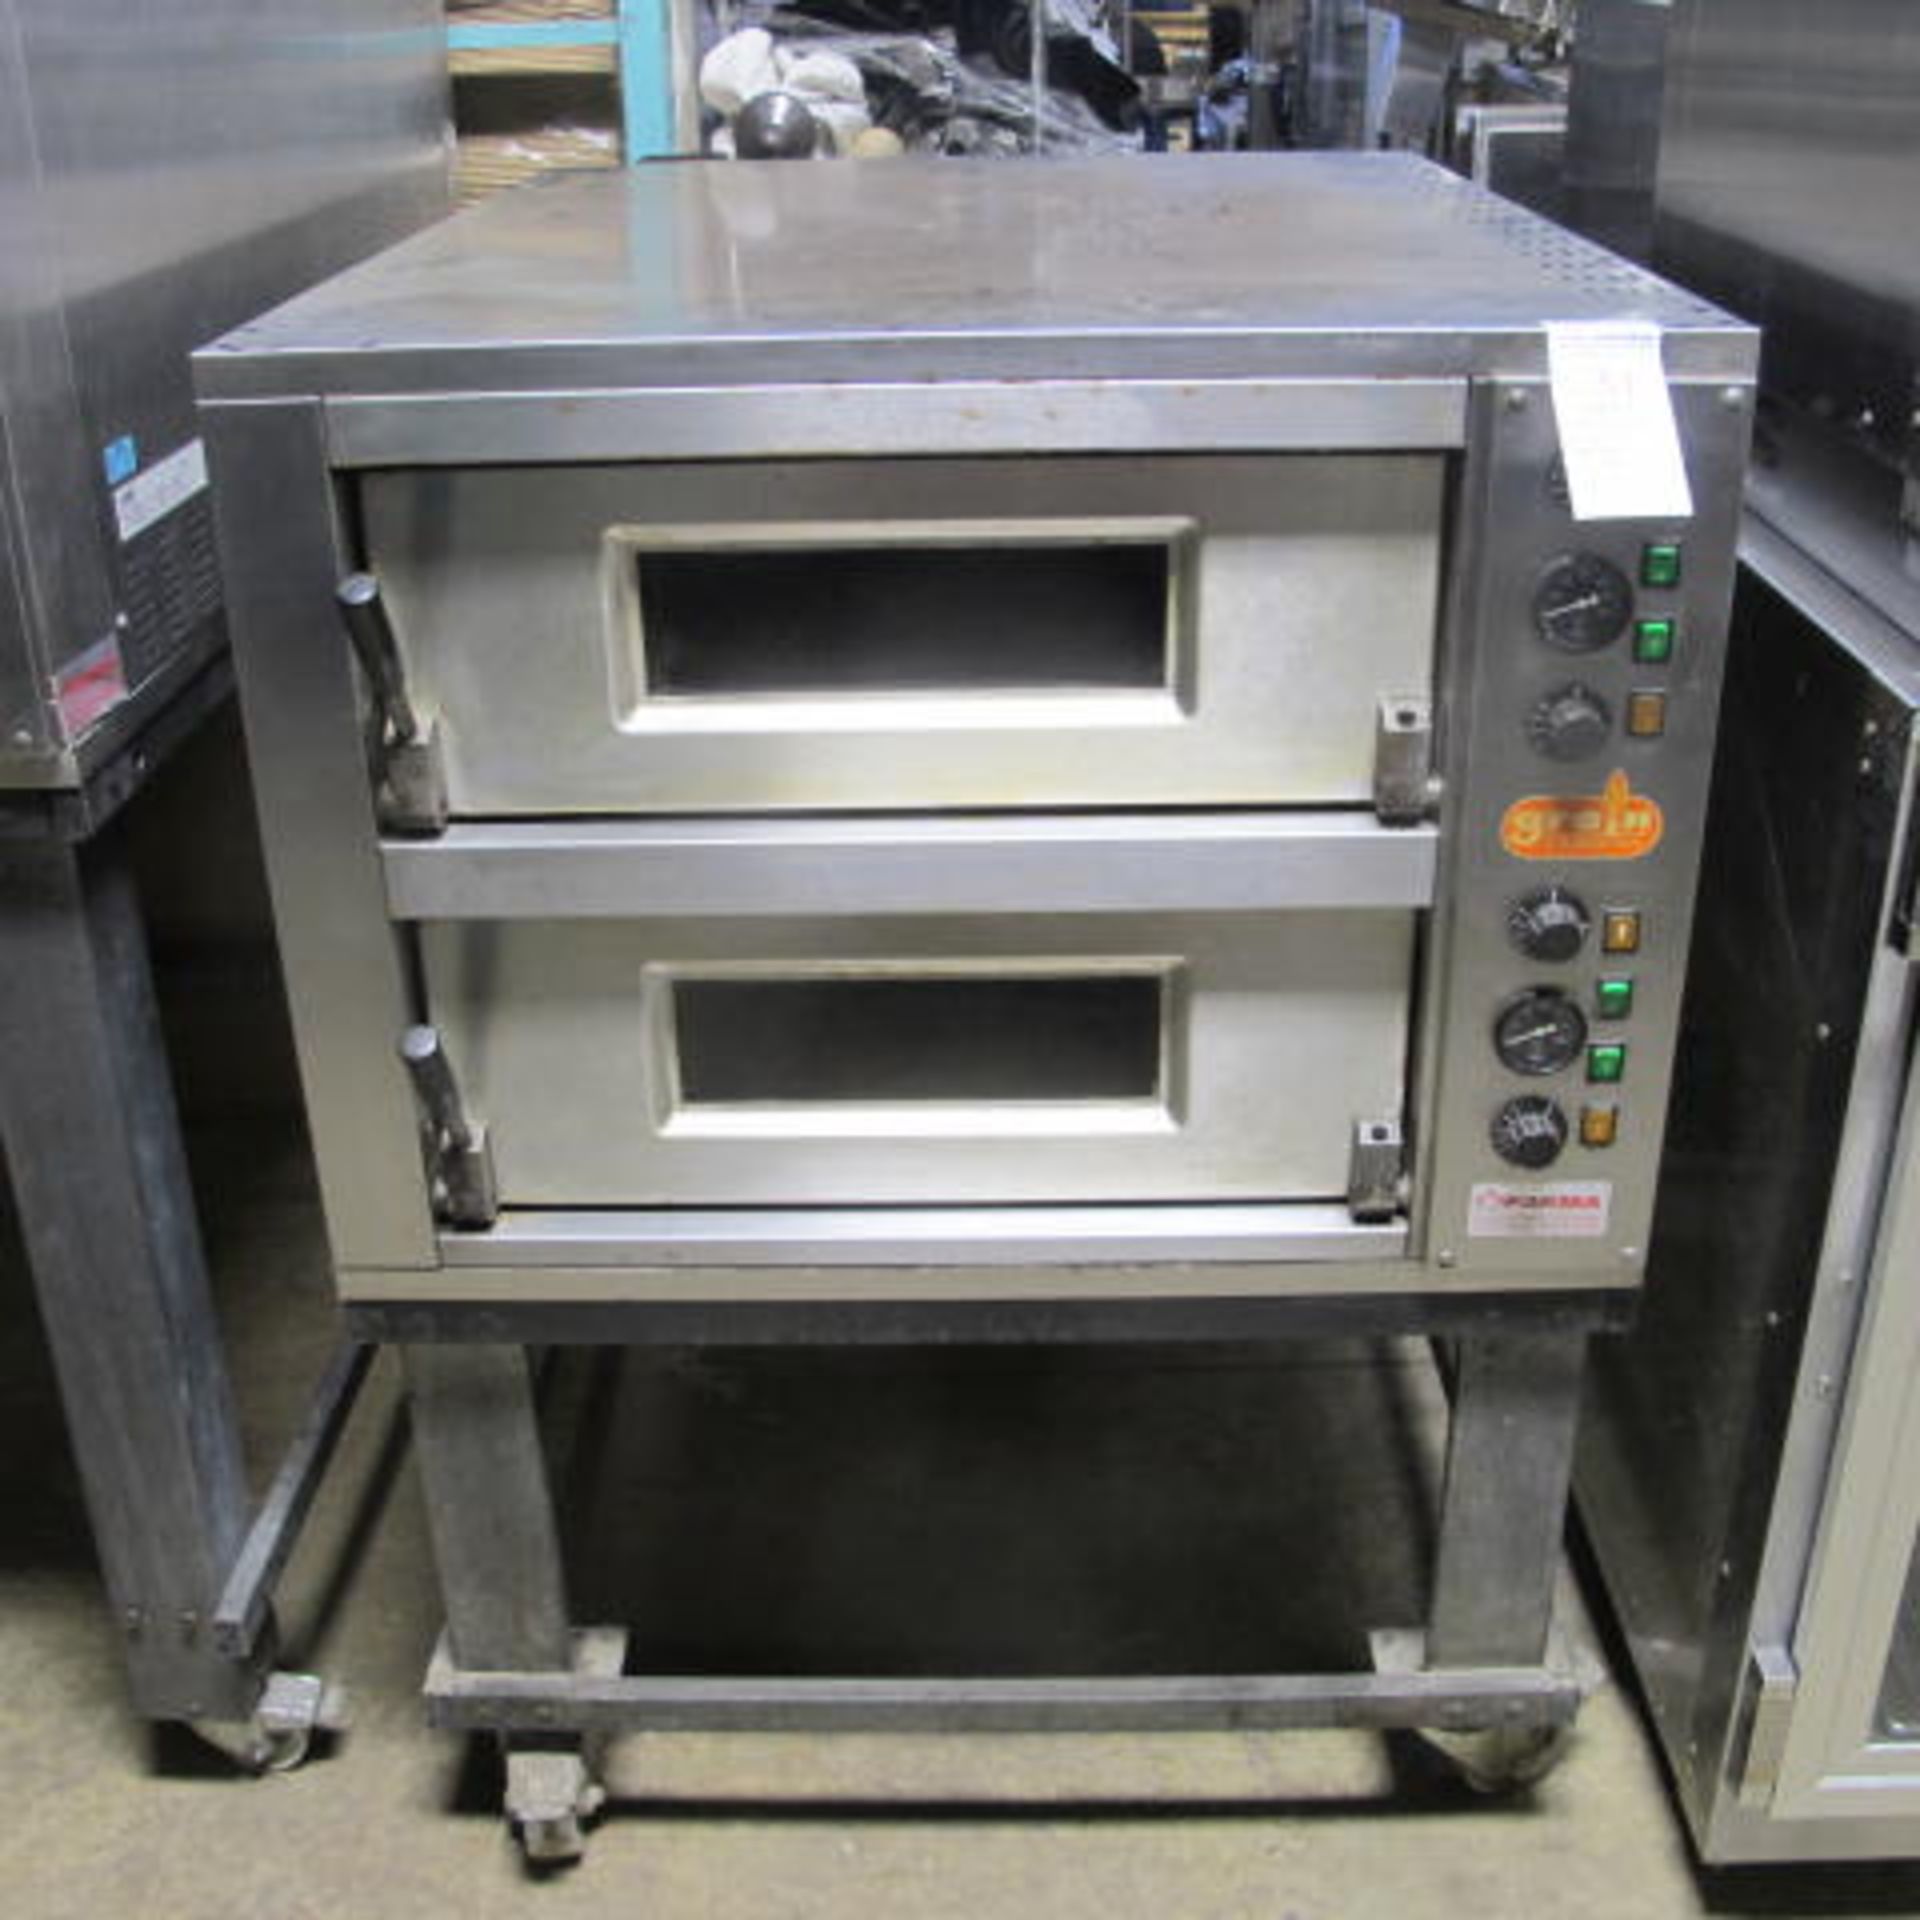 1X, GRAIN DBL DECK, ELECTRIC BAKE OVEN - Image 2 of 7